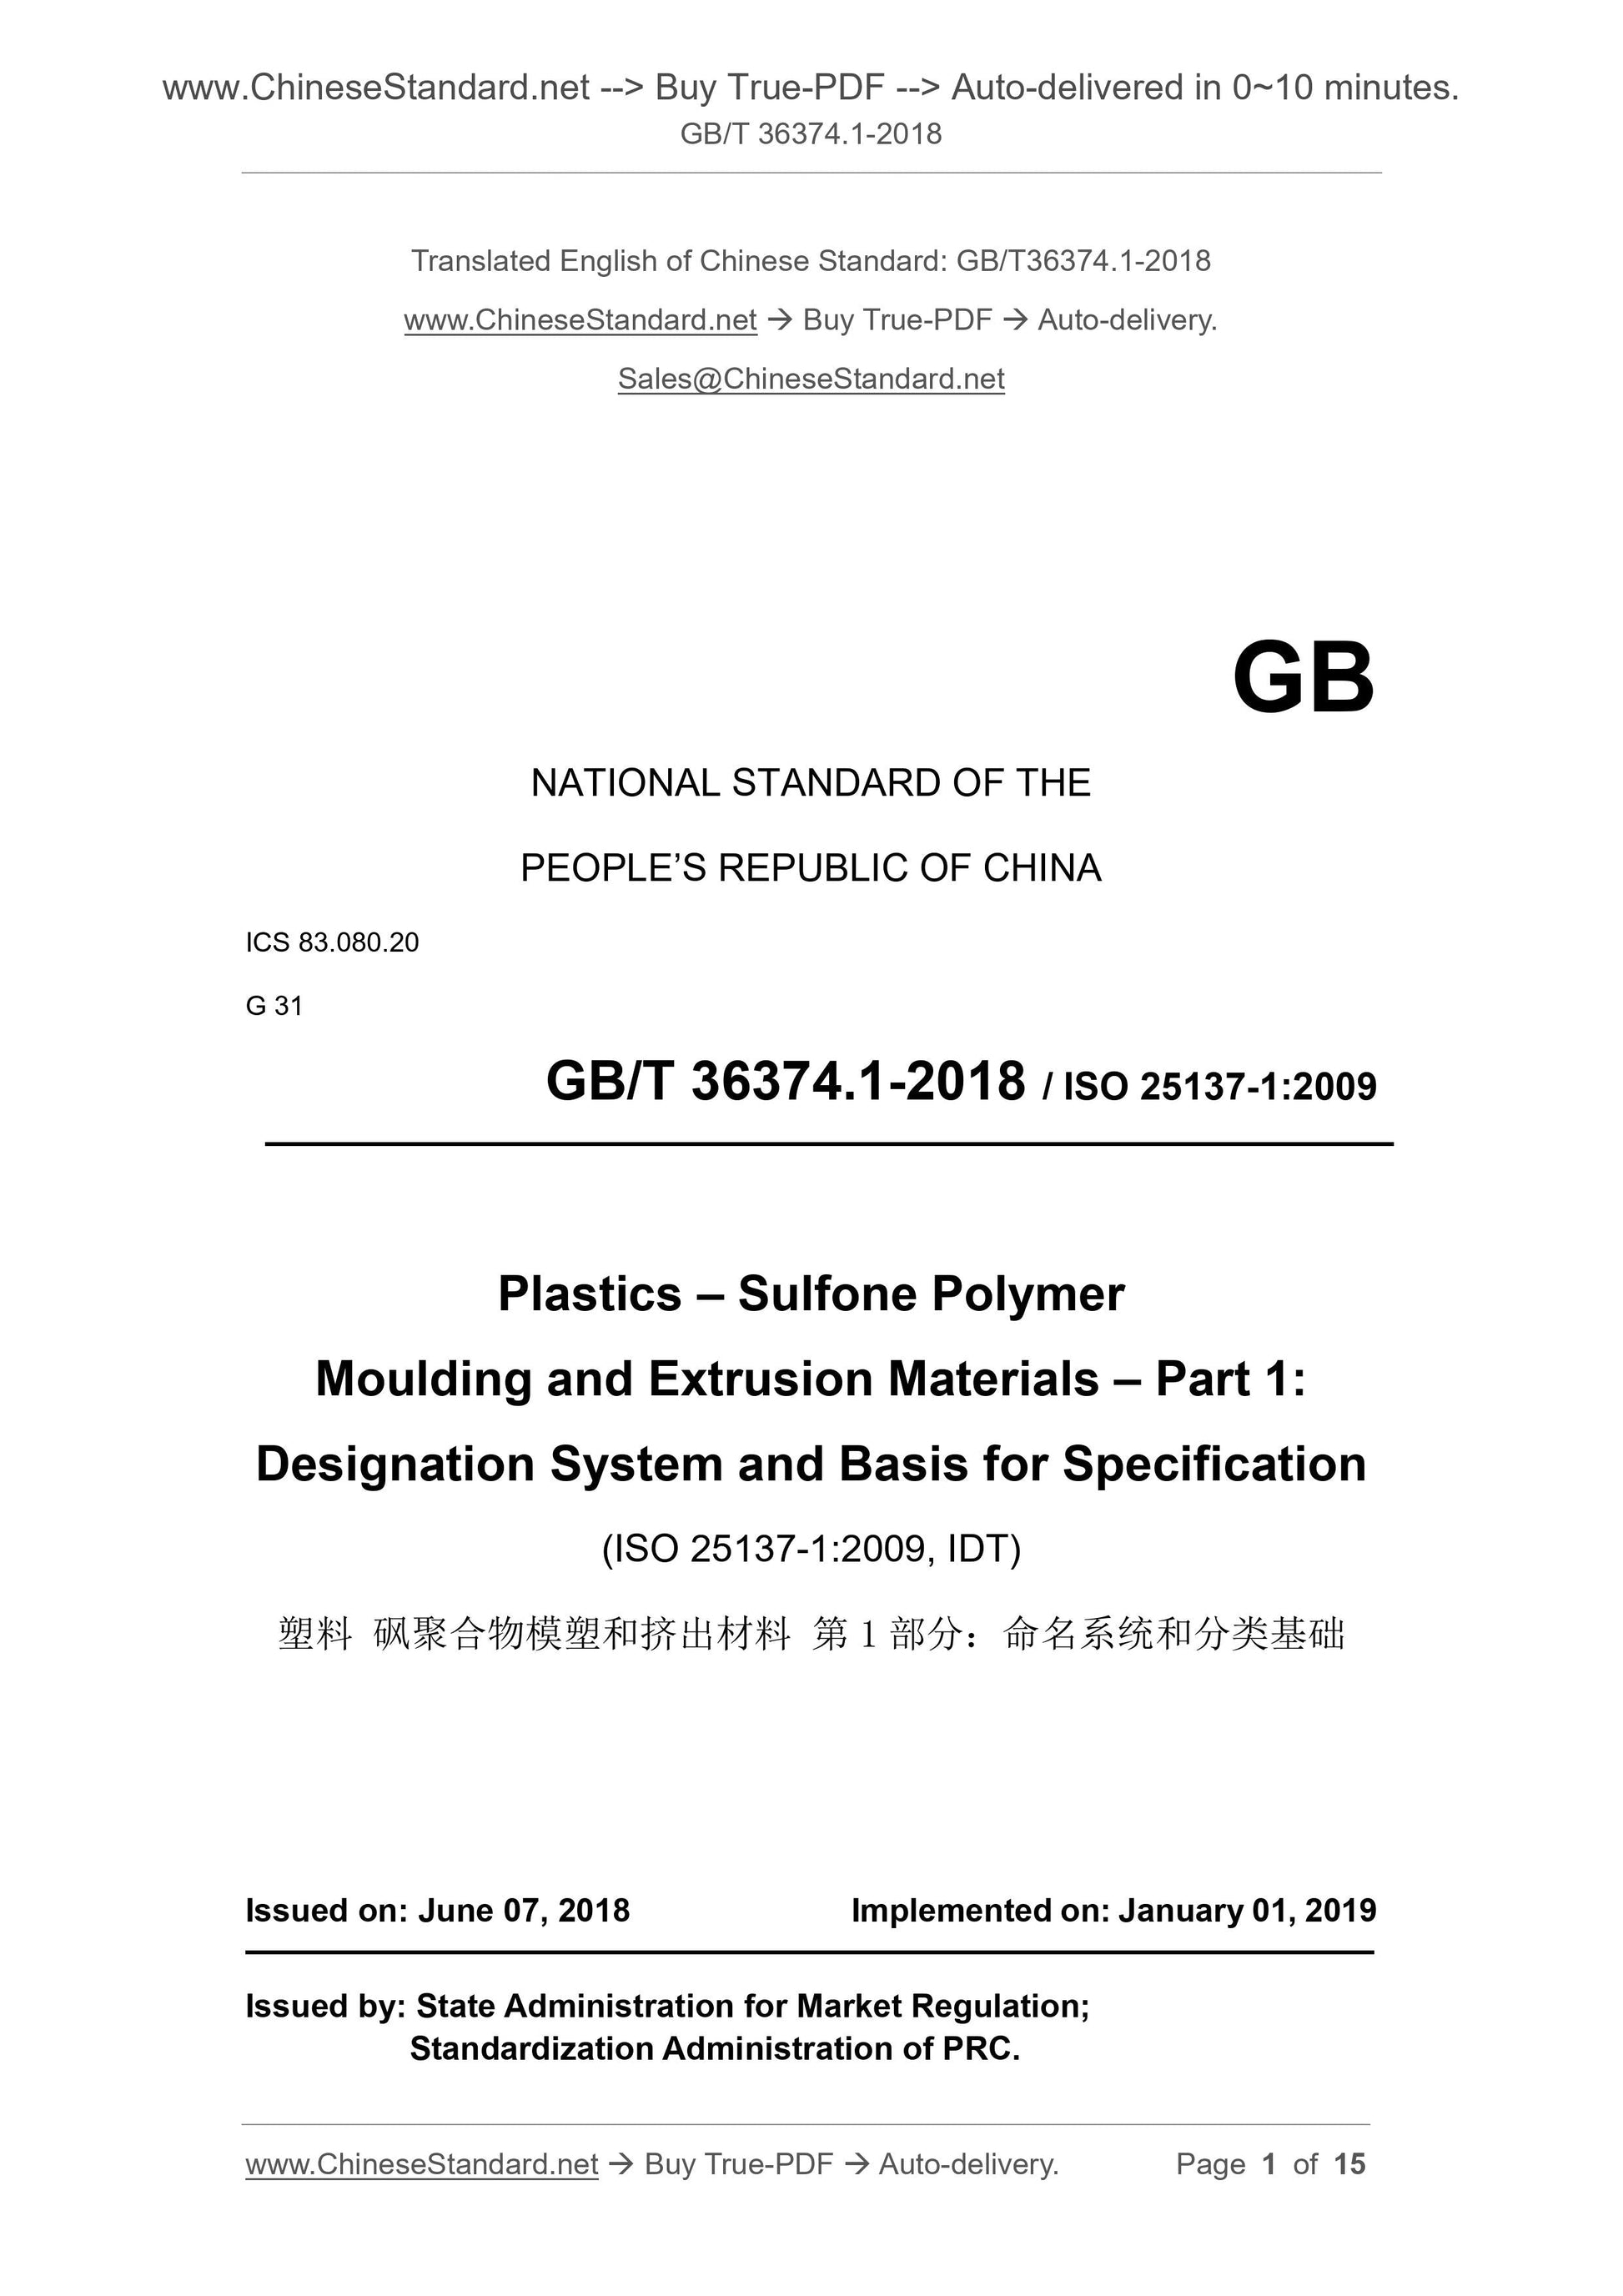 GB/T 36374.1-2018 Page 1